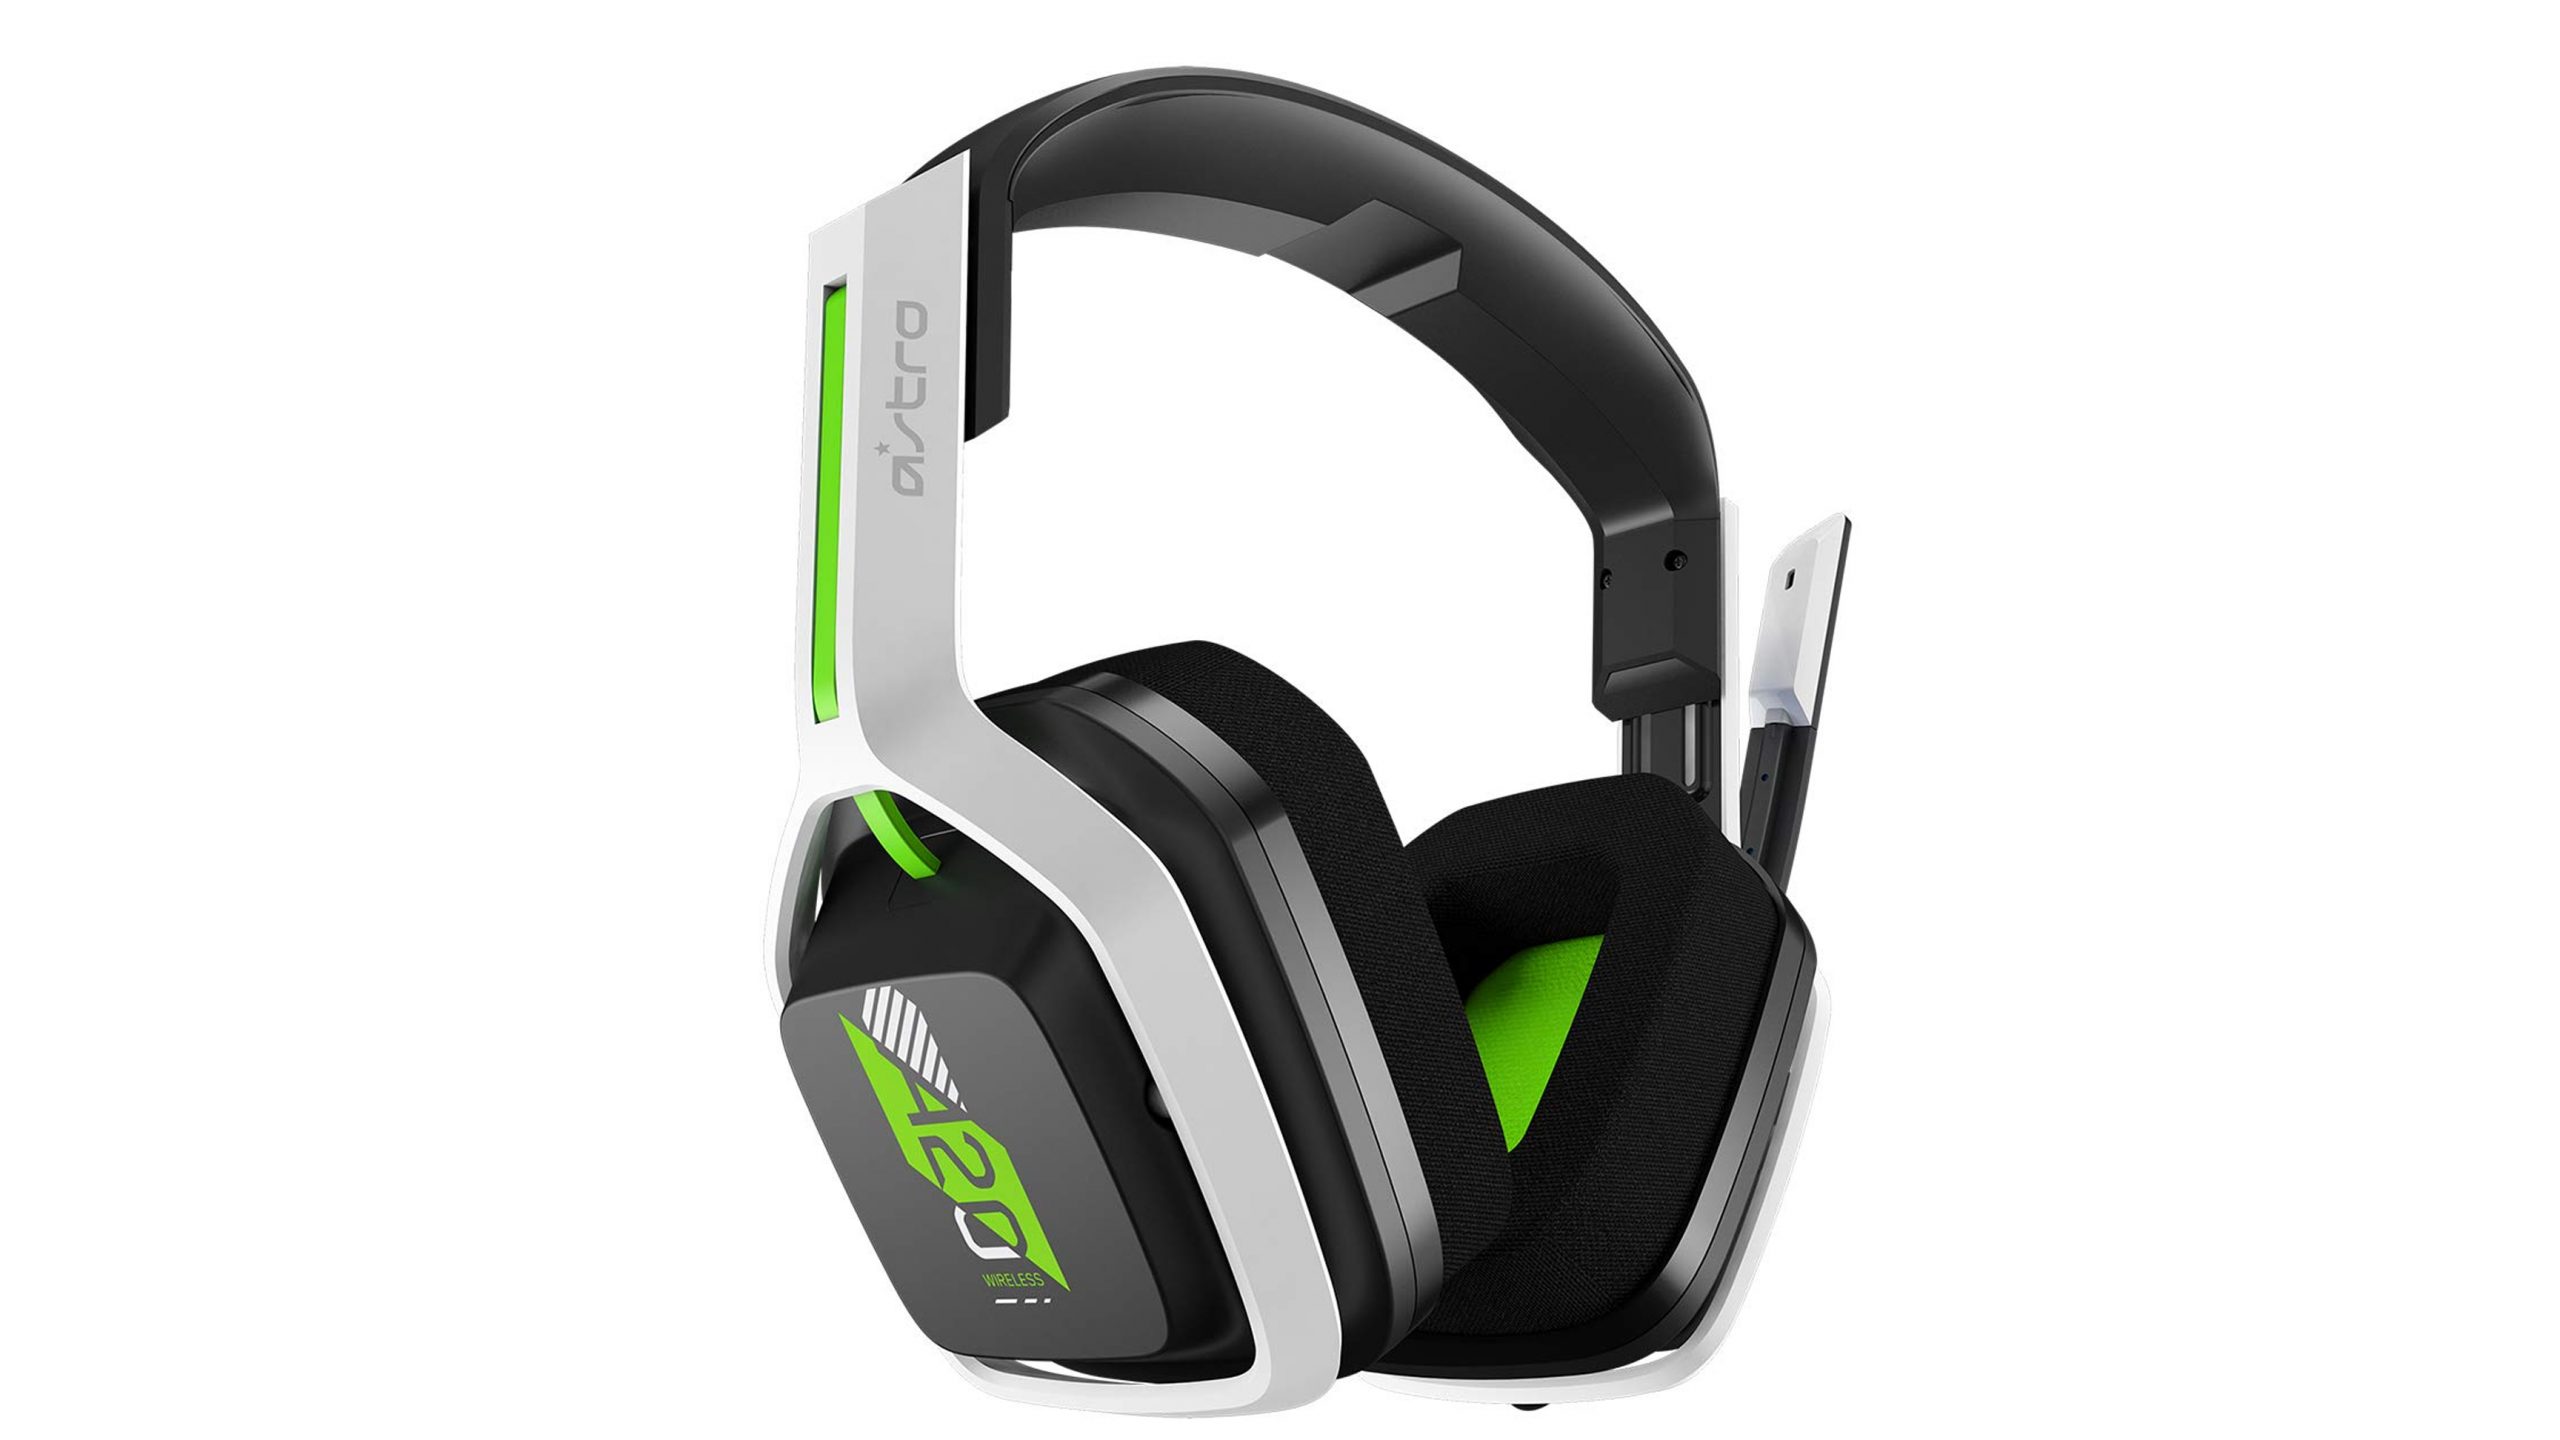 The Astro A20 gaming headset for Xbox against a white background.